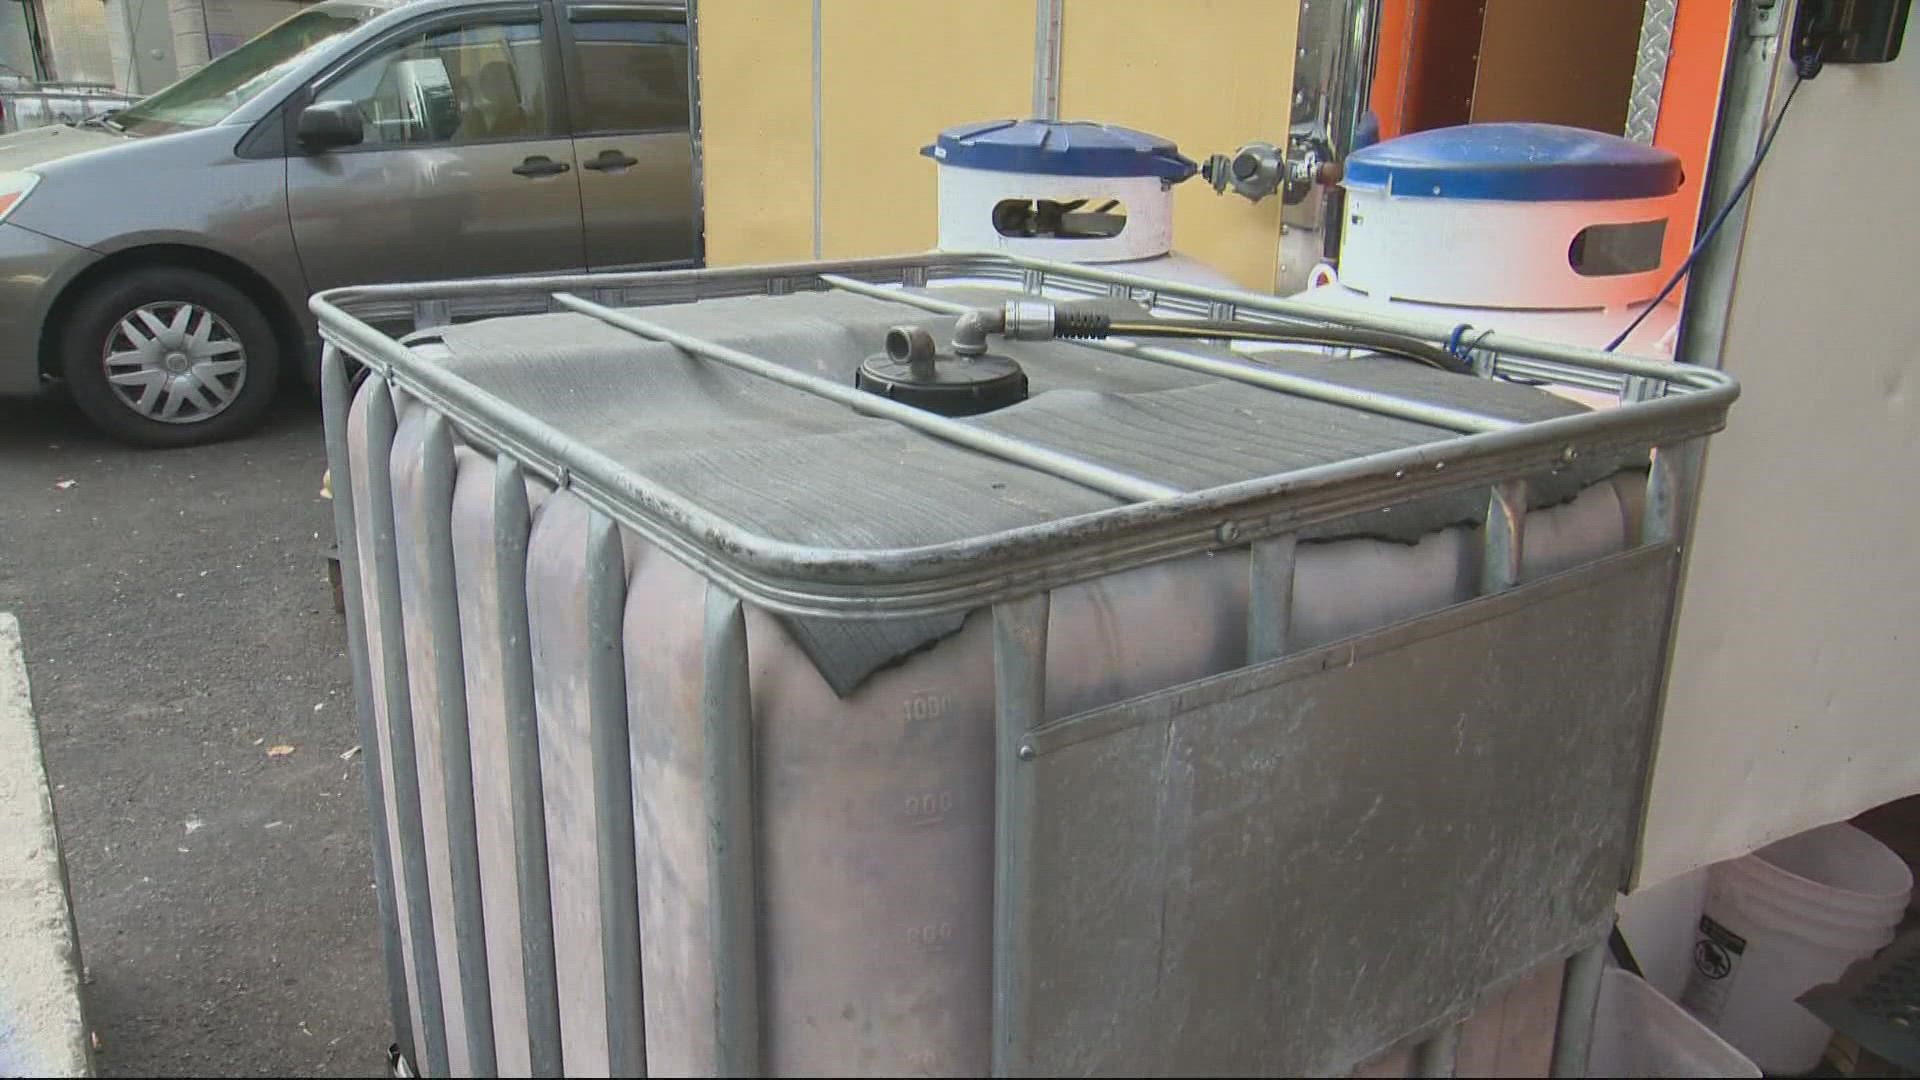 The Oregon Health authority implemented a new rule saying food trucks, carts and pods can no longer store wastewater. This is in an effort to cut down on spills.